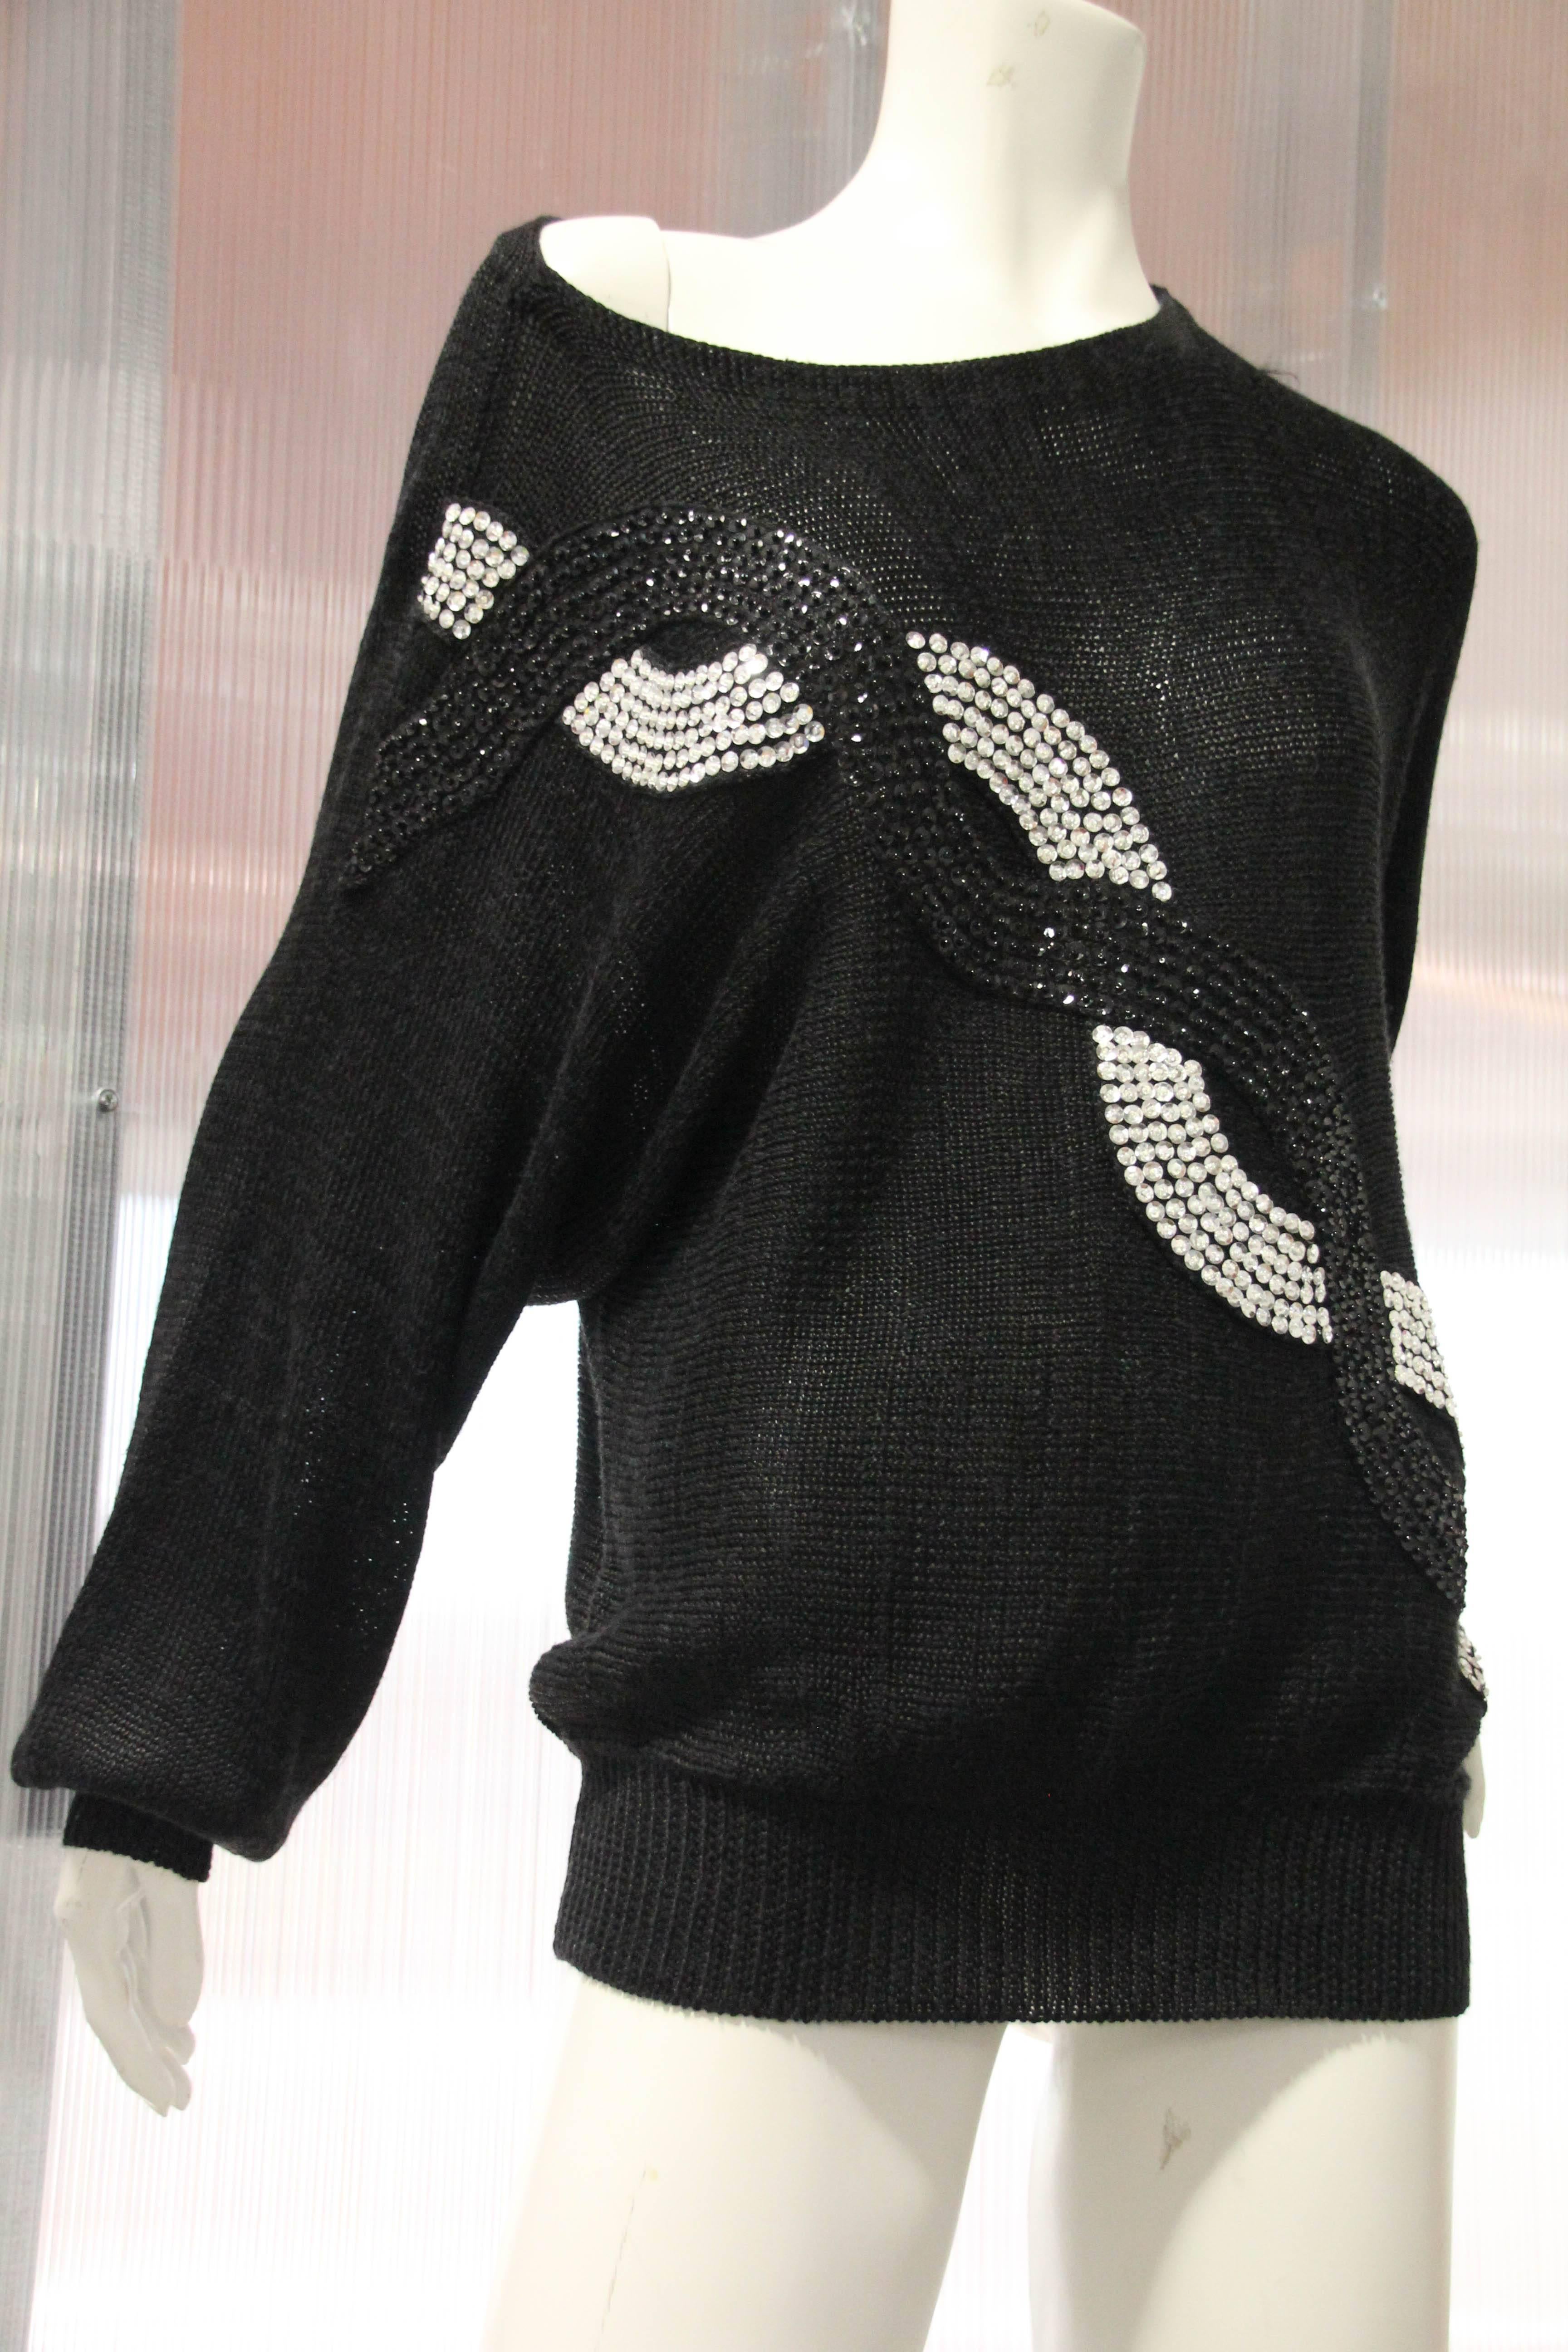 1980s Italian knit rayon cocktail sweater with black and silver bead and sequin embellishment: two serpentine lines of sequins in black and white intertwine for a chain link effect. 